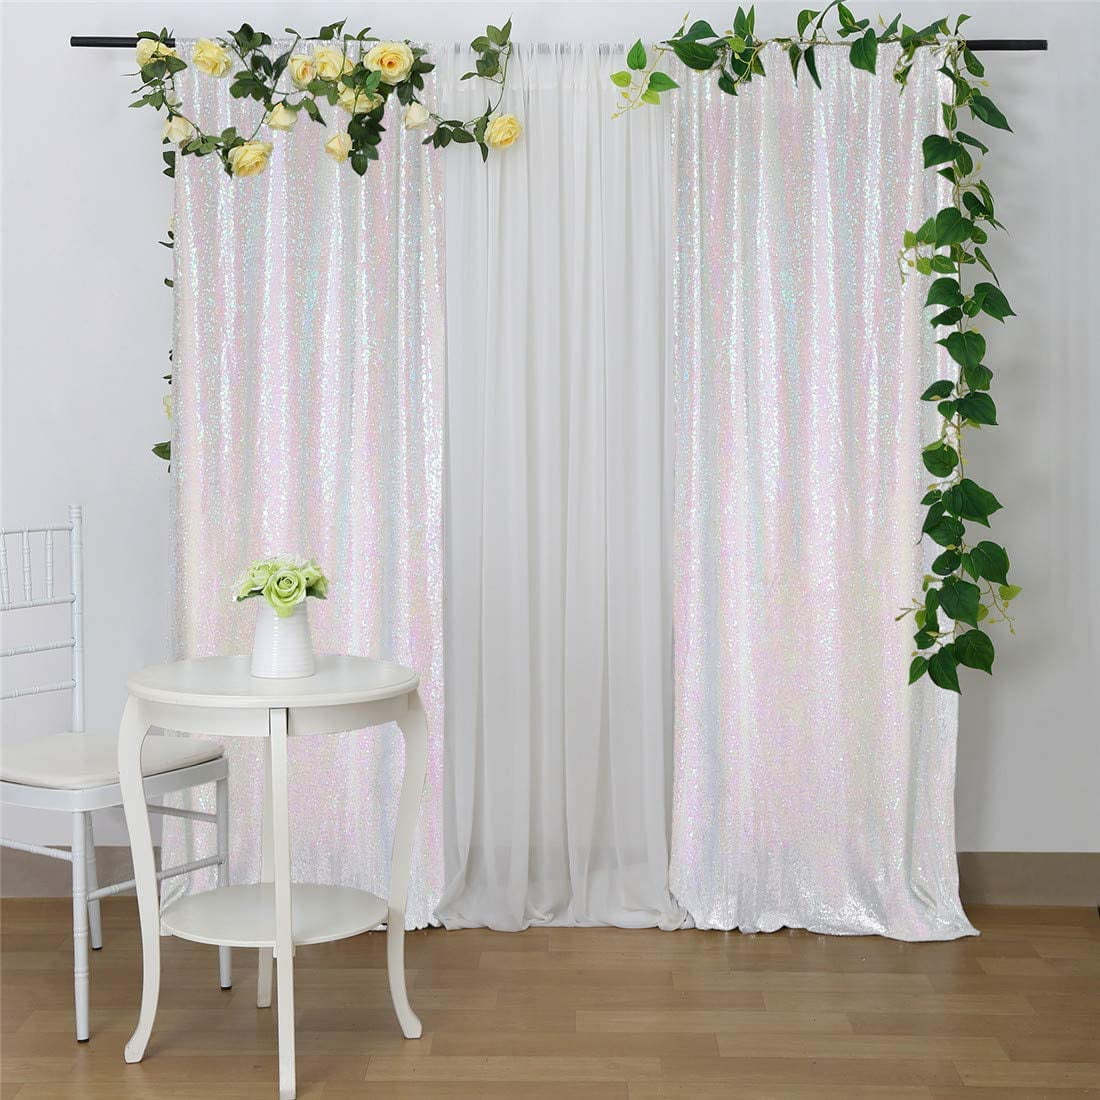 Sequin Curtain 2 Panel 2FTx8FT Sequin Backdrop Curtains Fabric Wedding Backdrop 